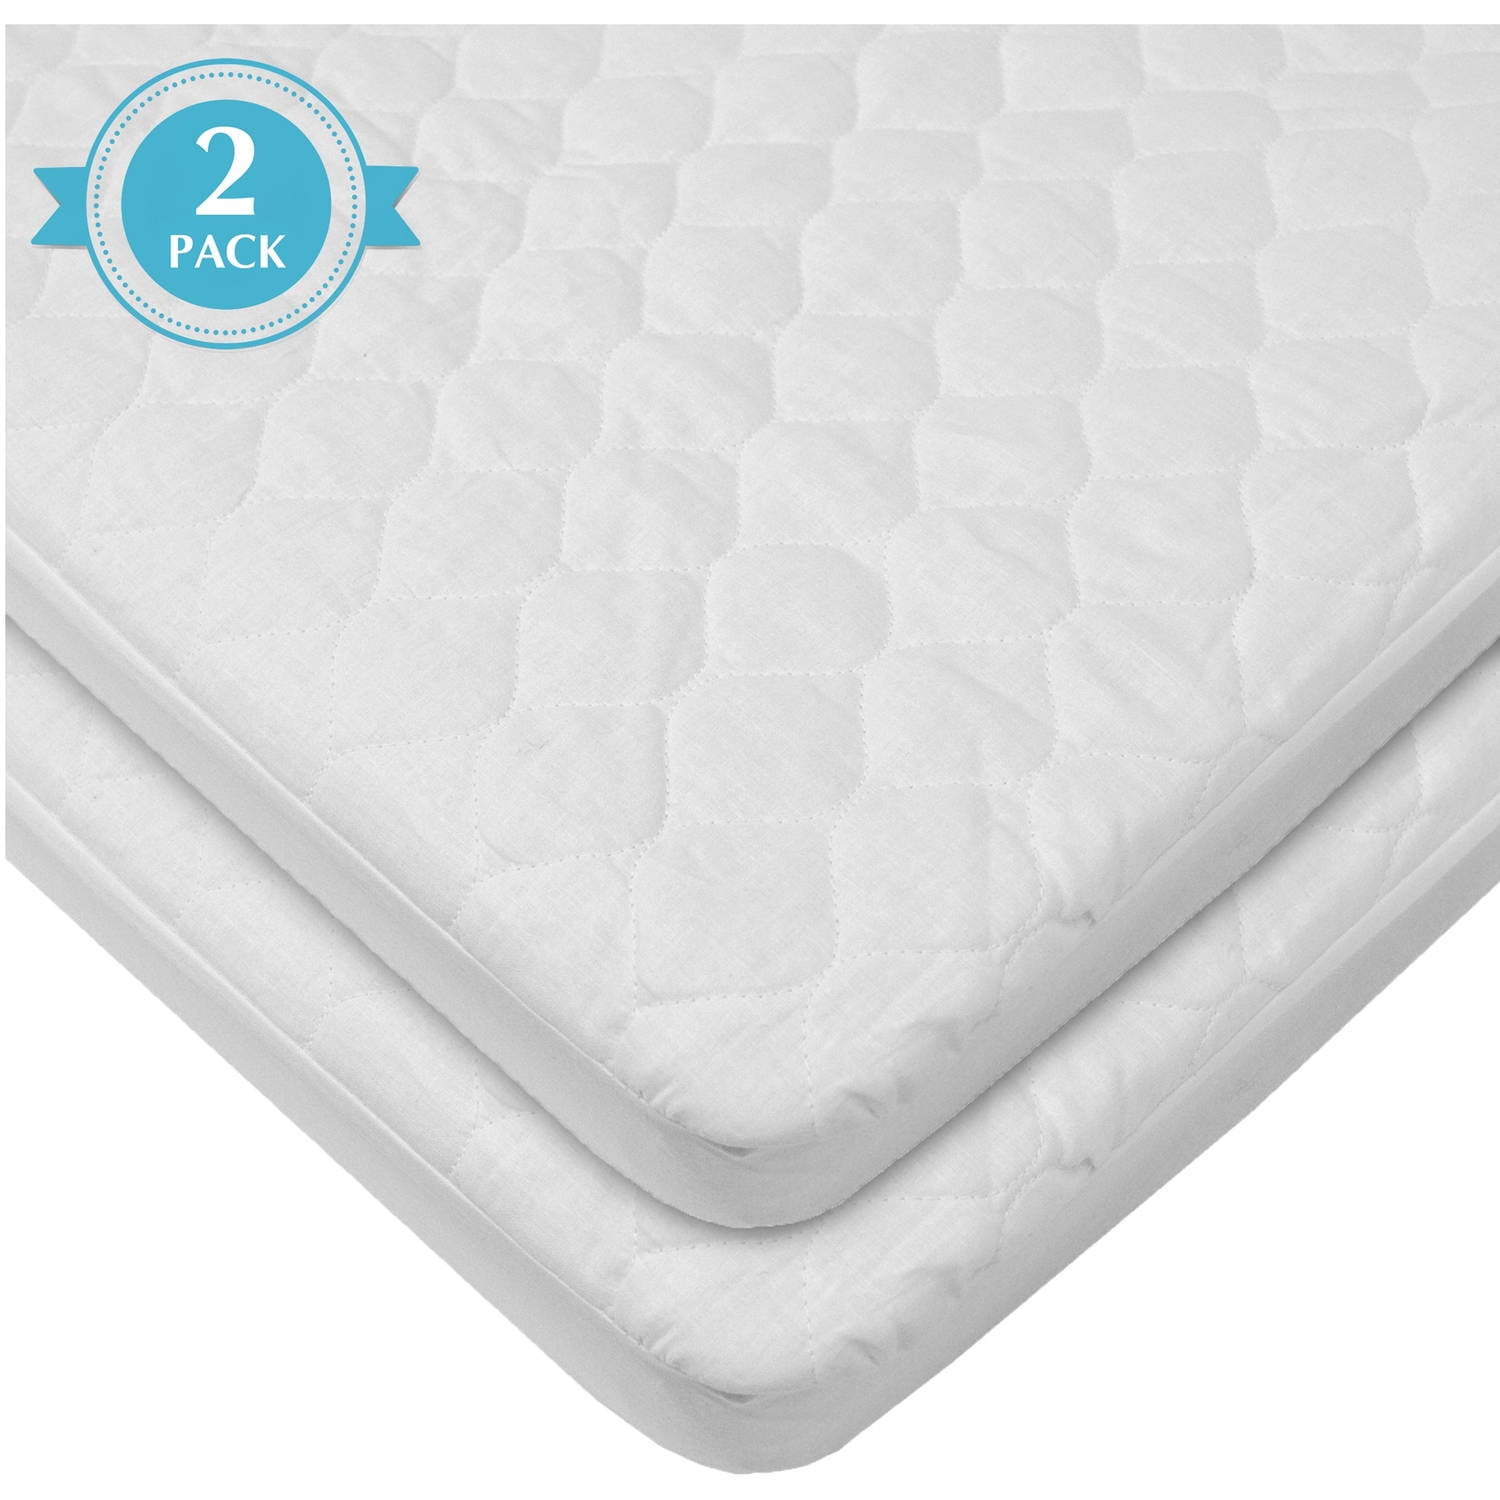 Blue Crib Mattress Pads & Covers for sale